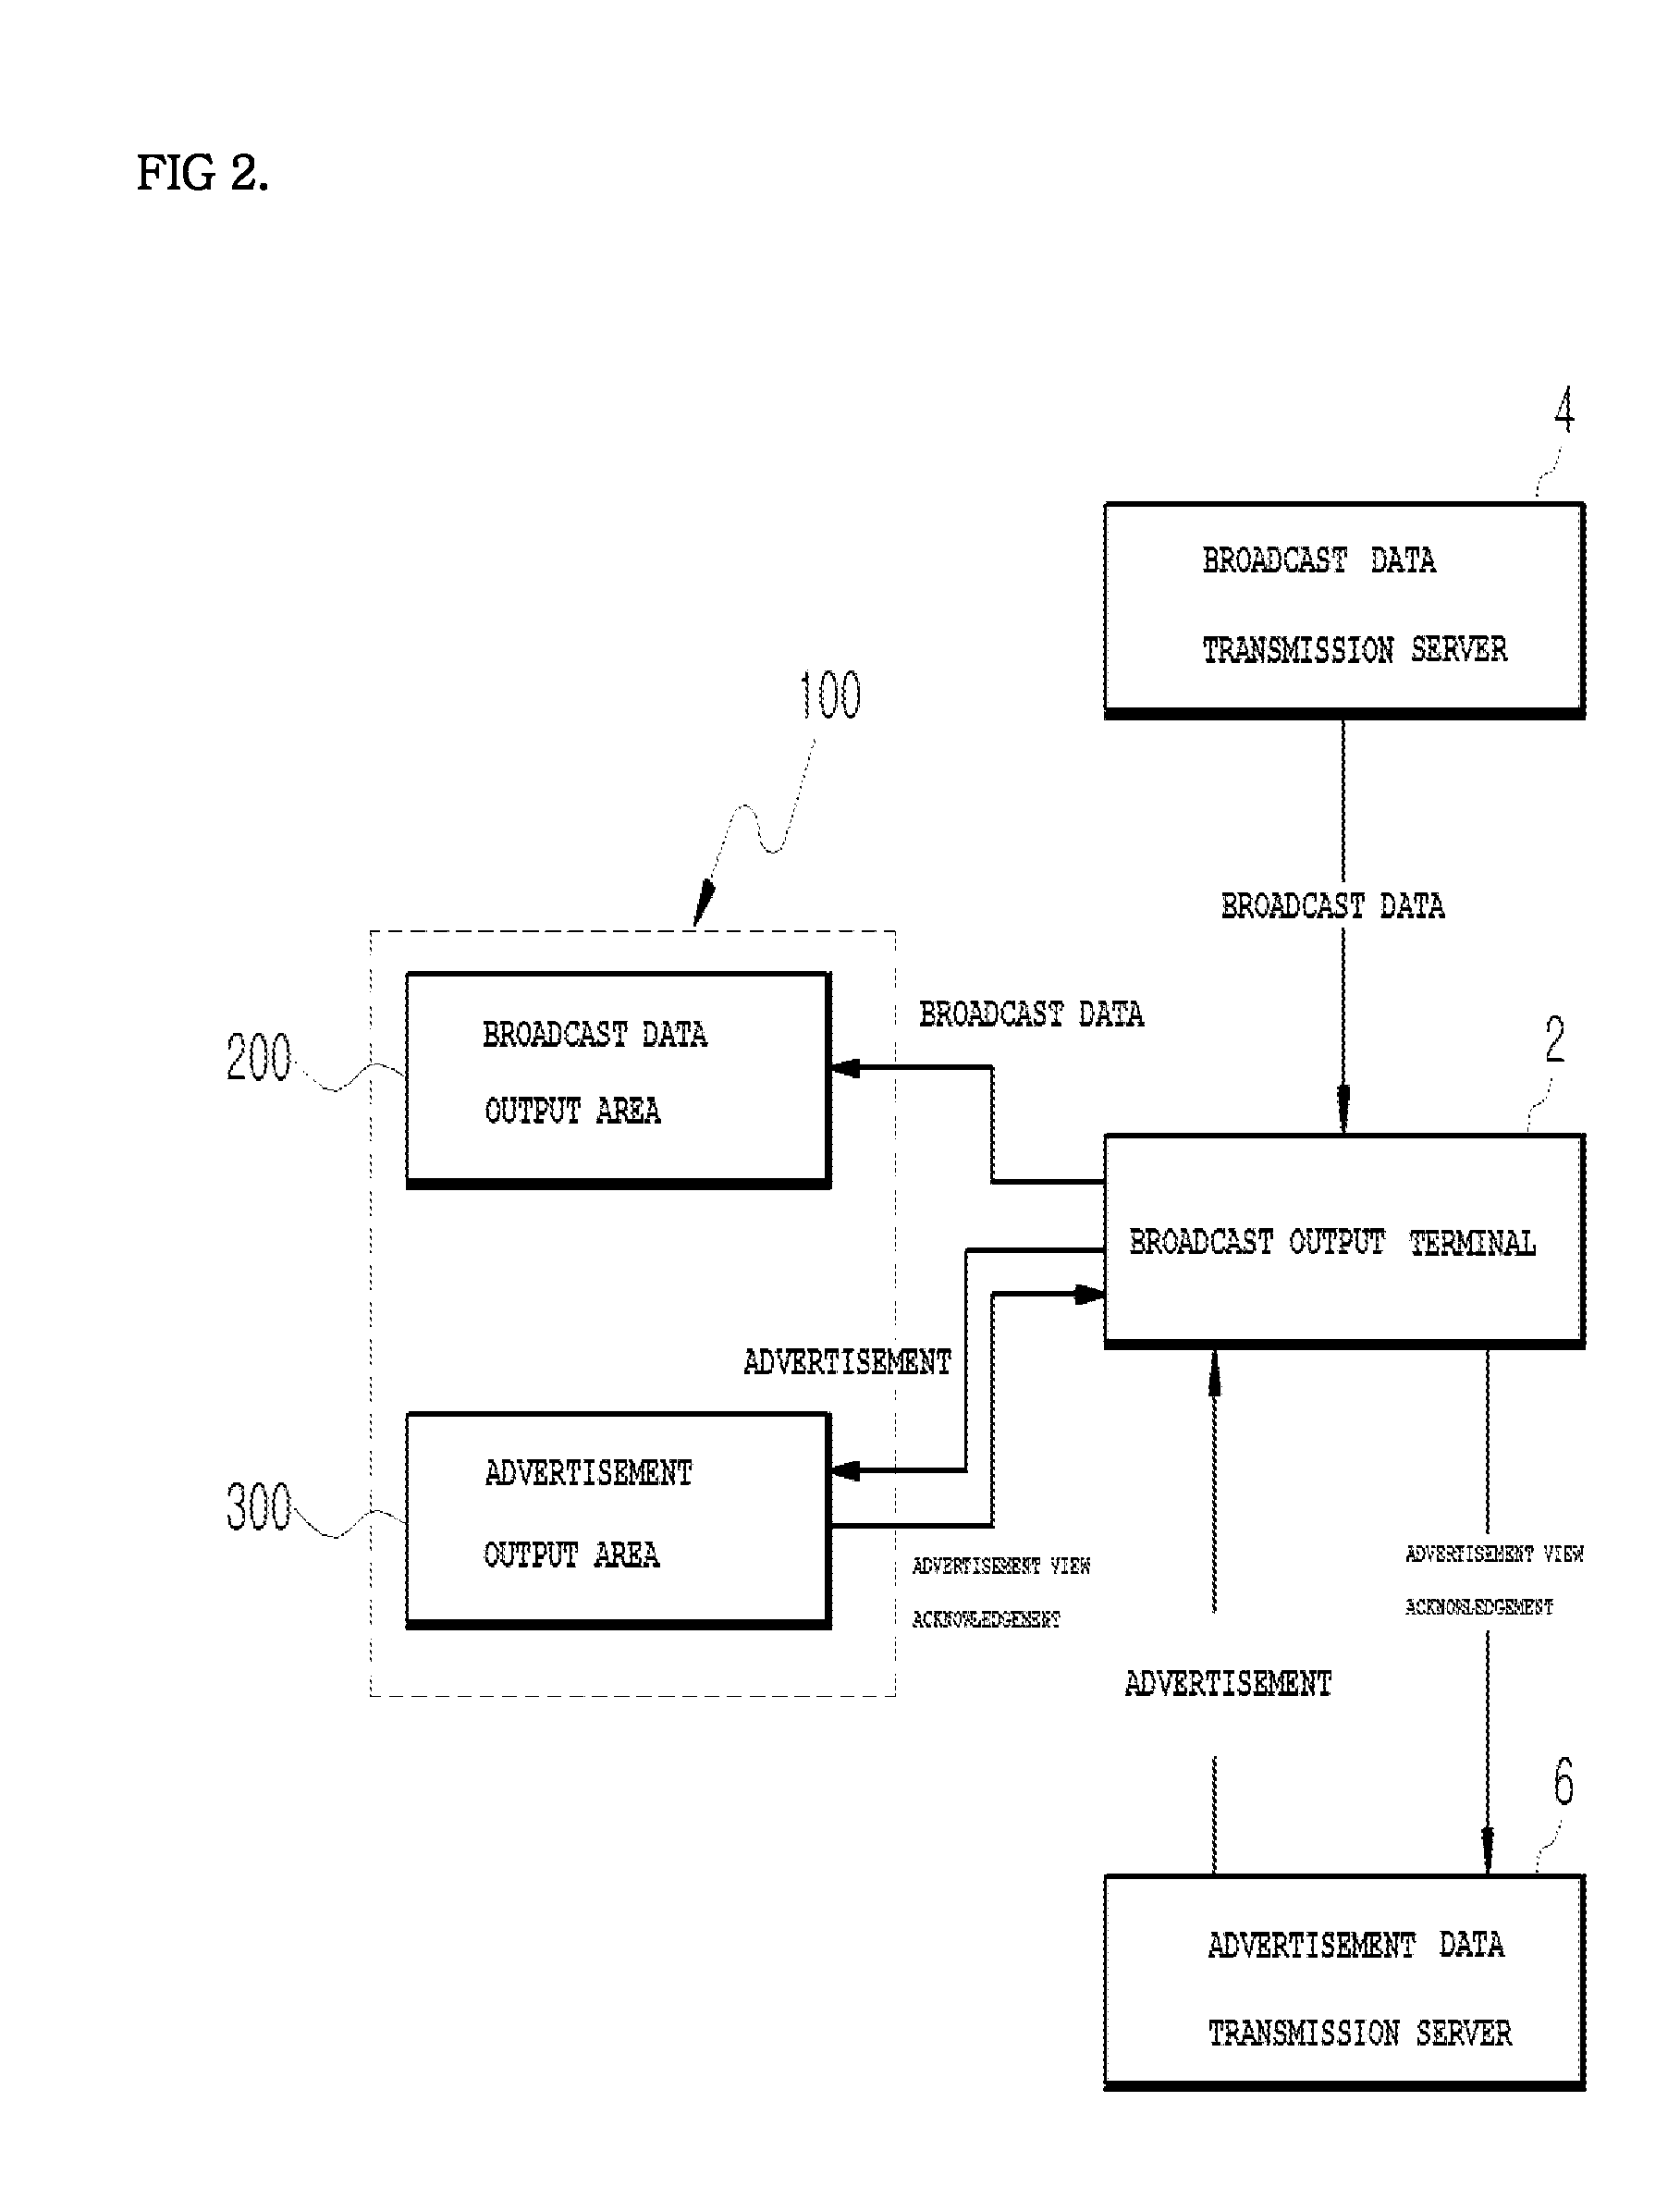 System for controlling automatic exposure of broadcast advertisement data and method for same